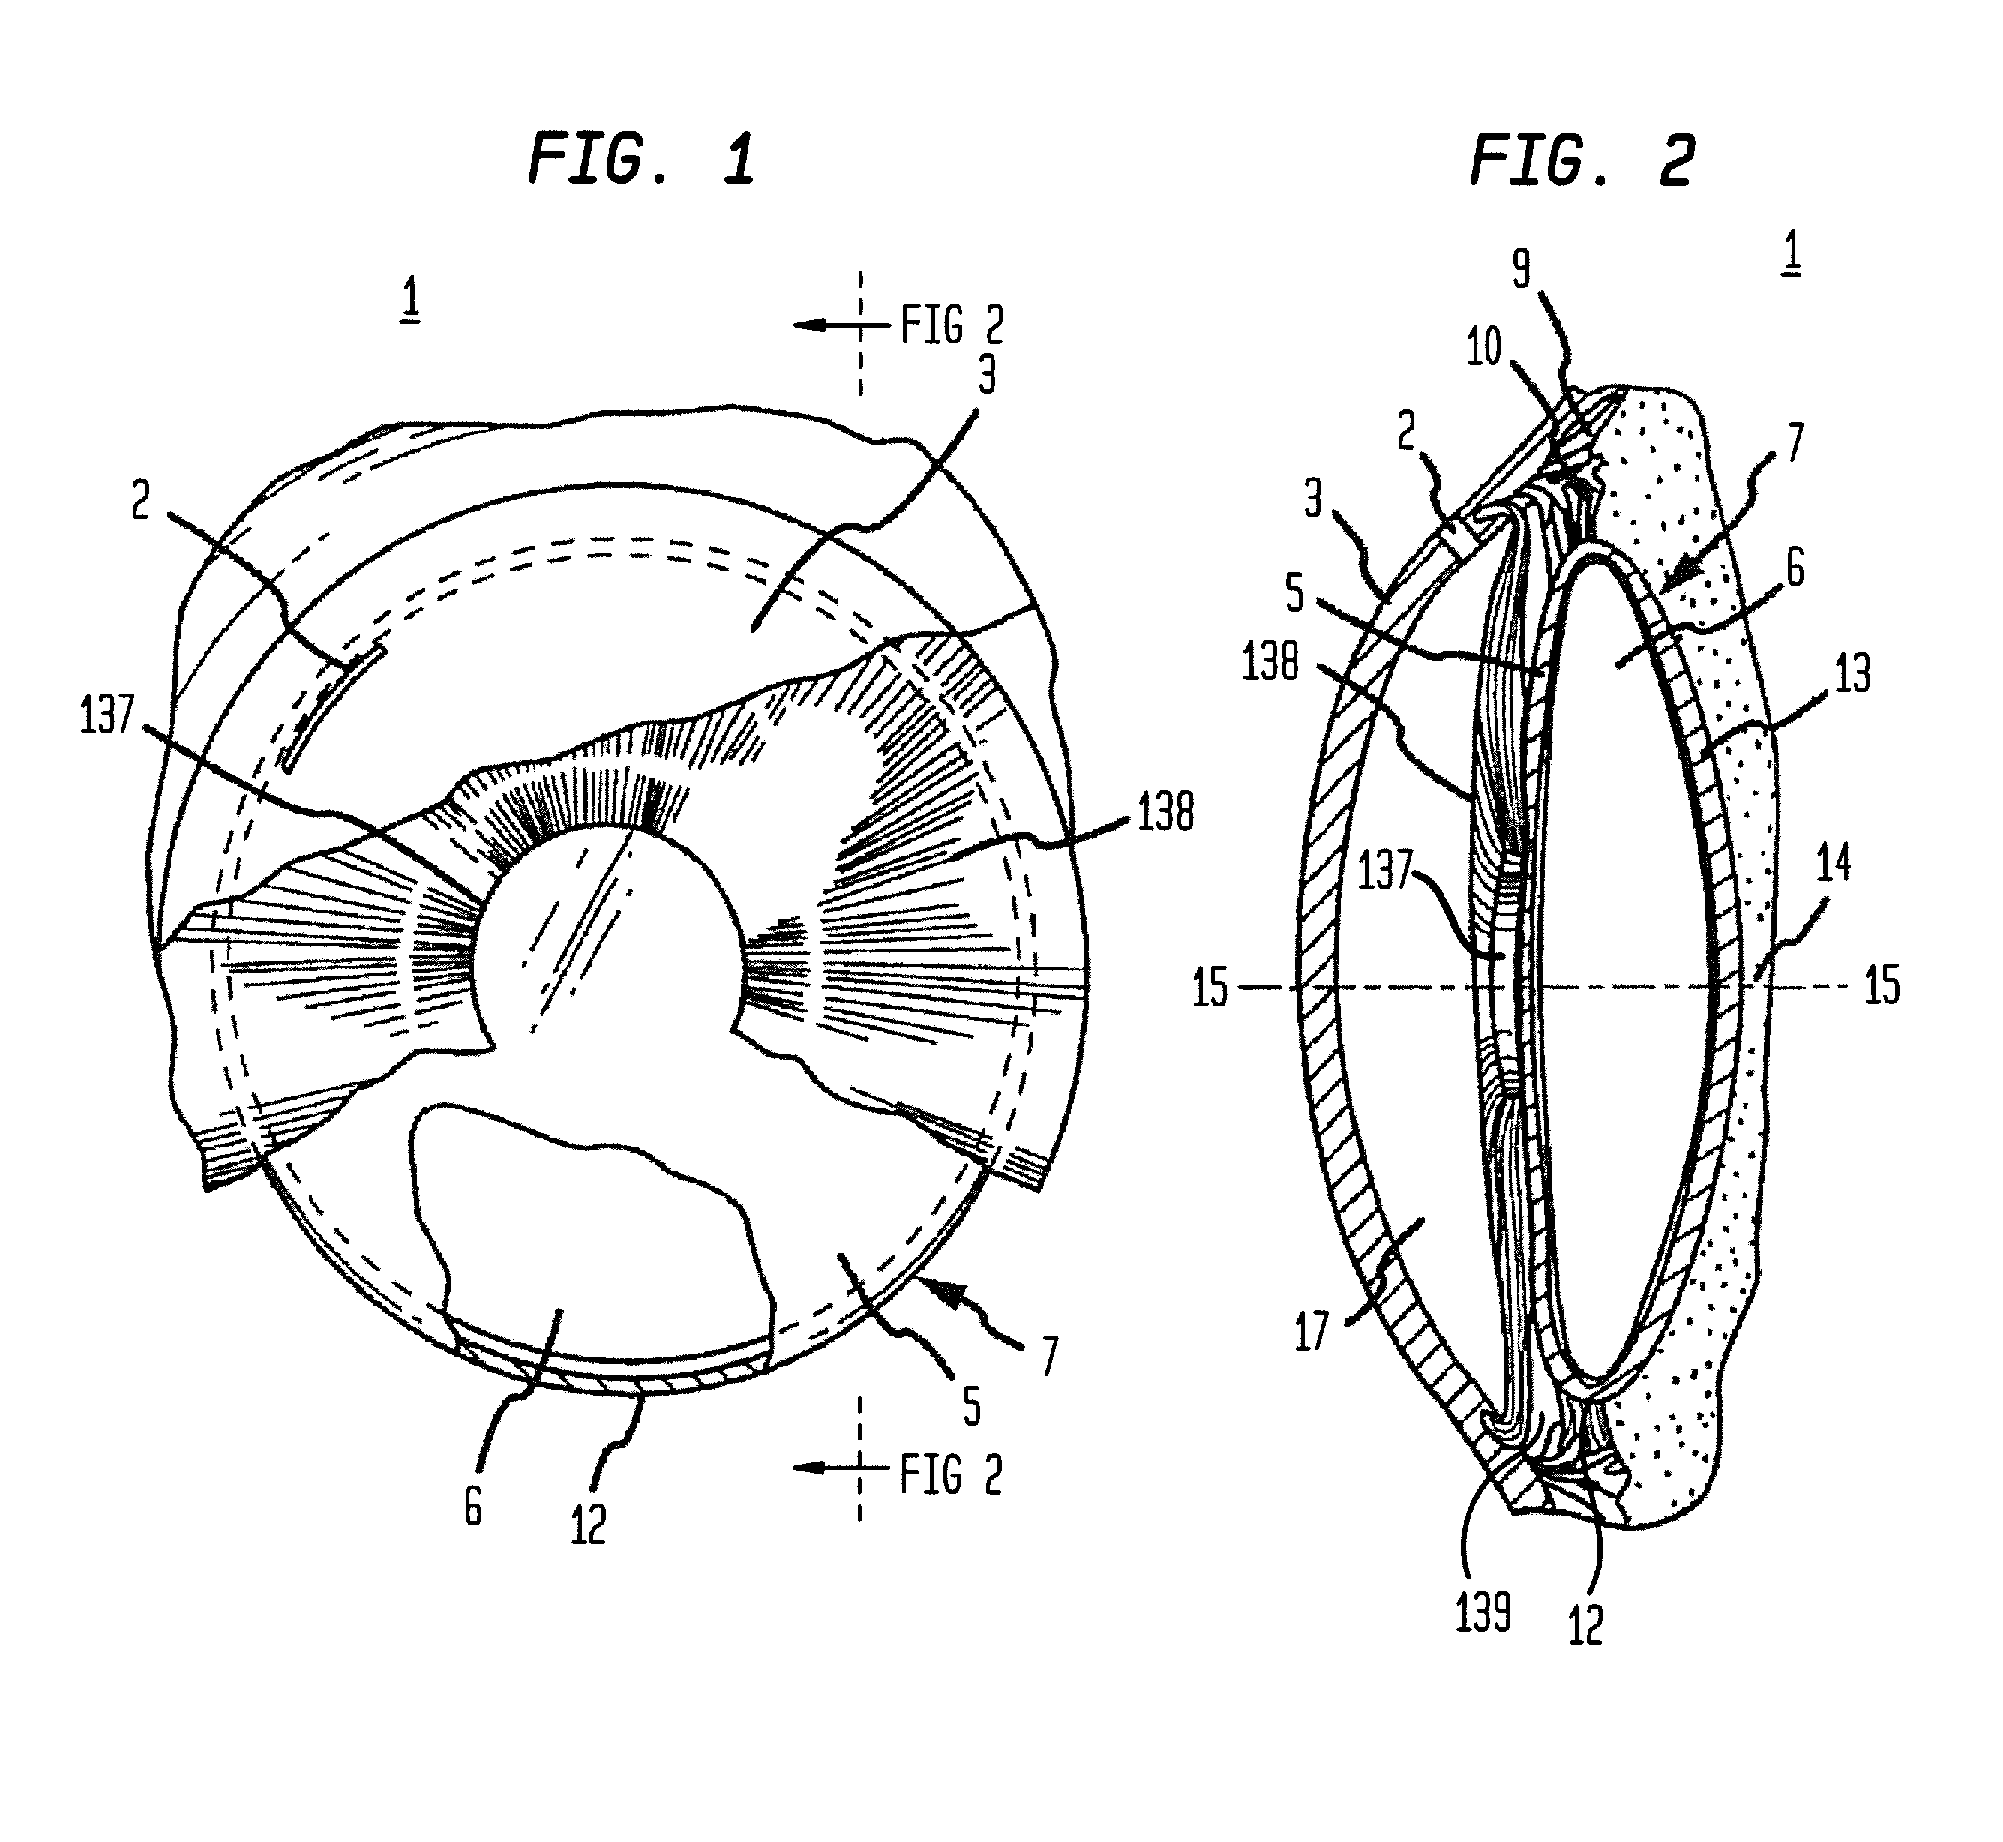 Micropatterned Intraocular Implant